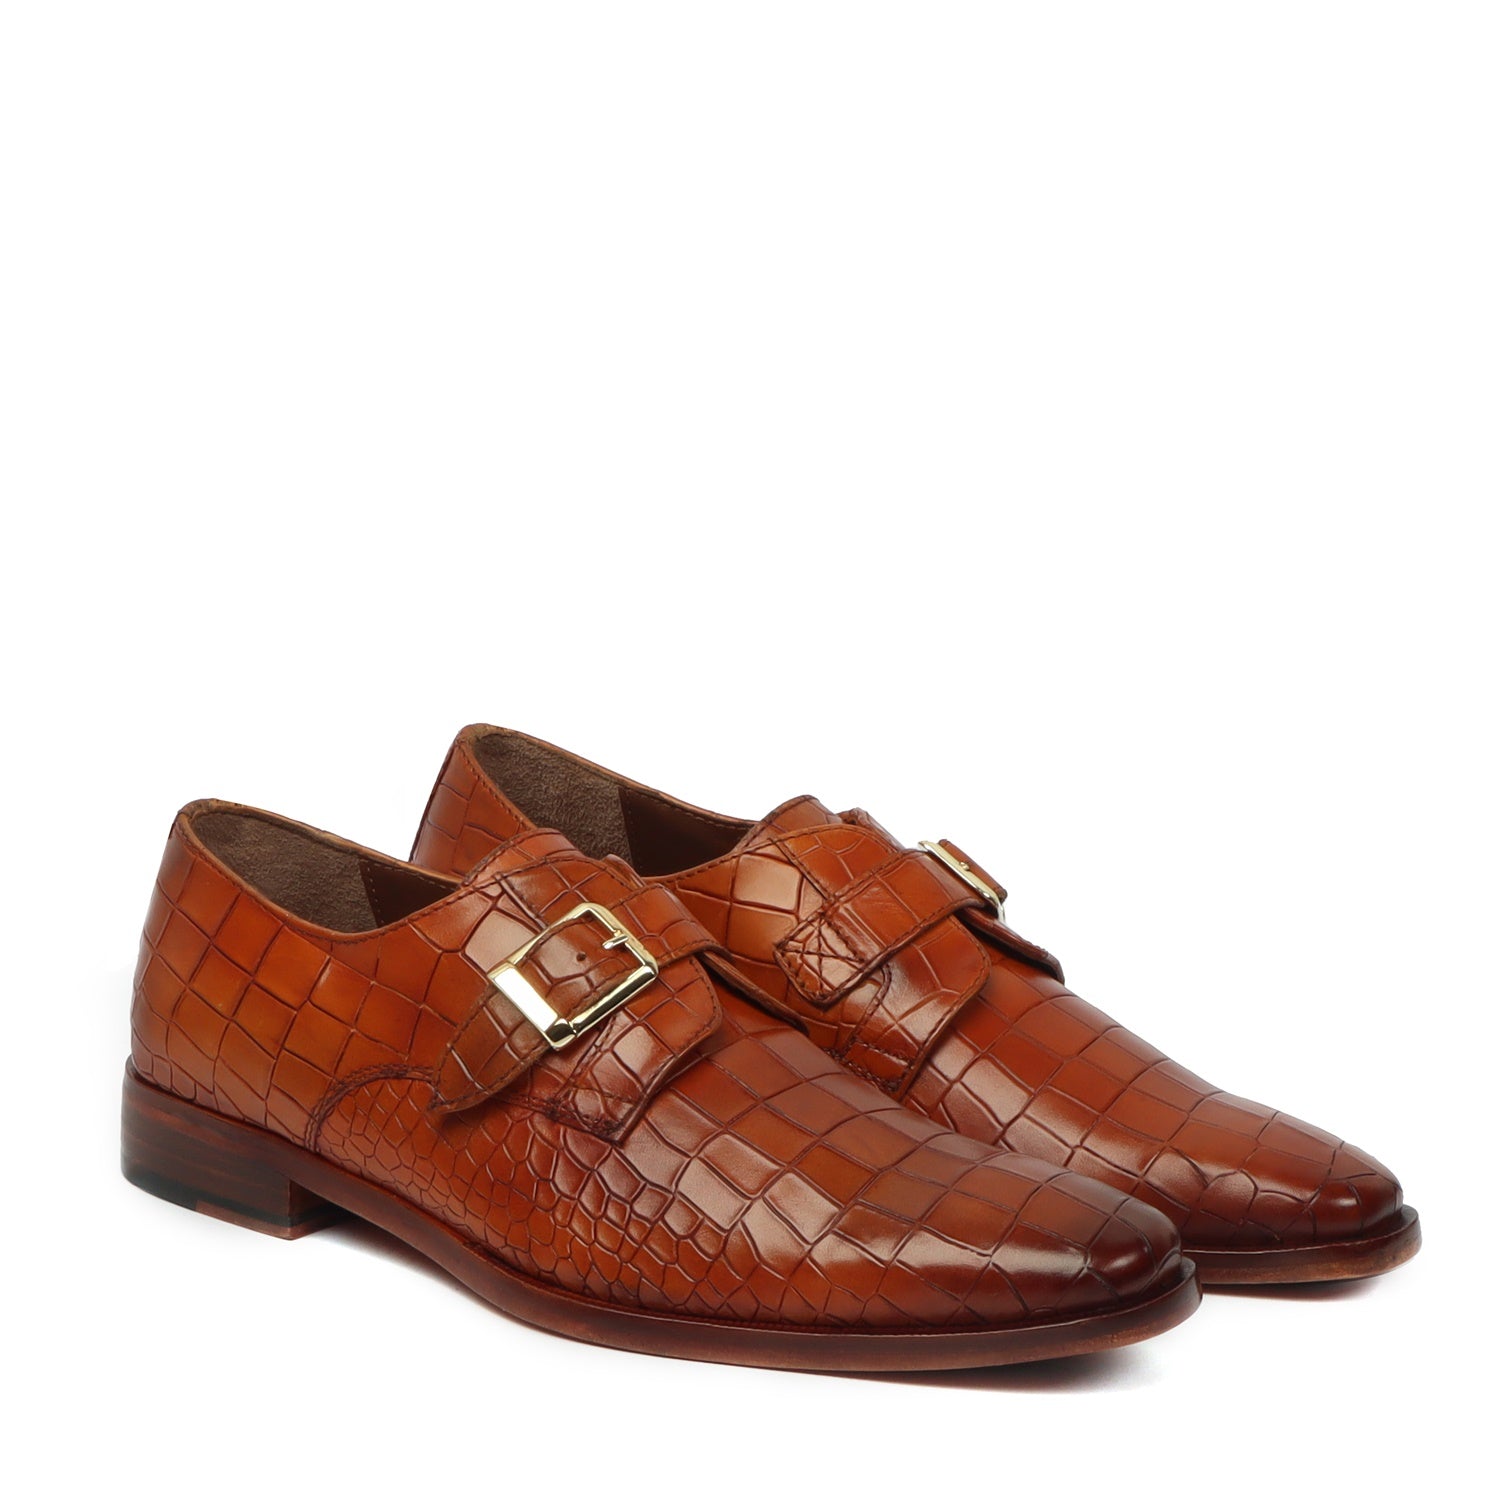 Slant Toe Formal Shoes With Derby Monk Strap Full Deep Cut Texture Leather